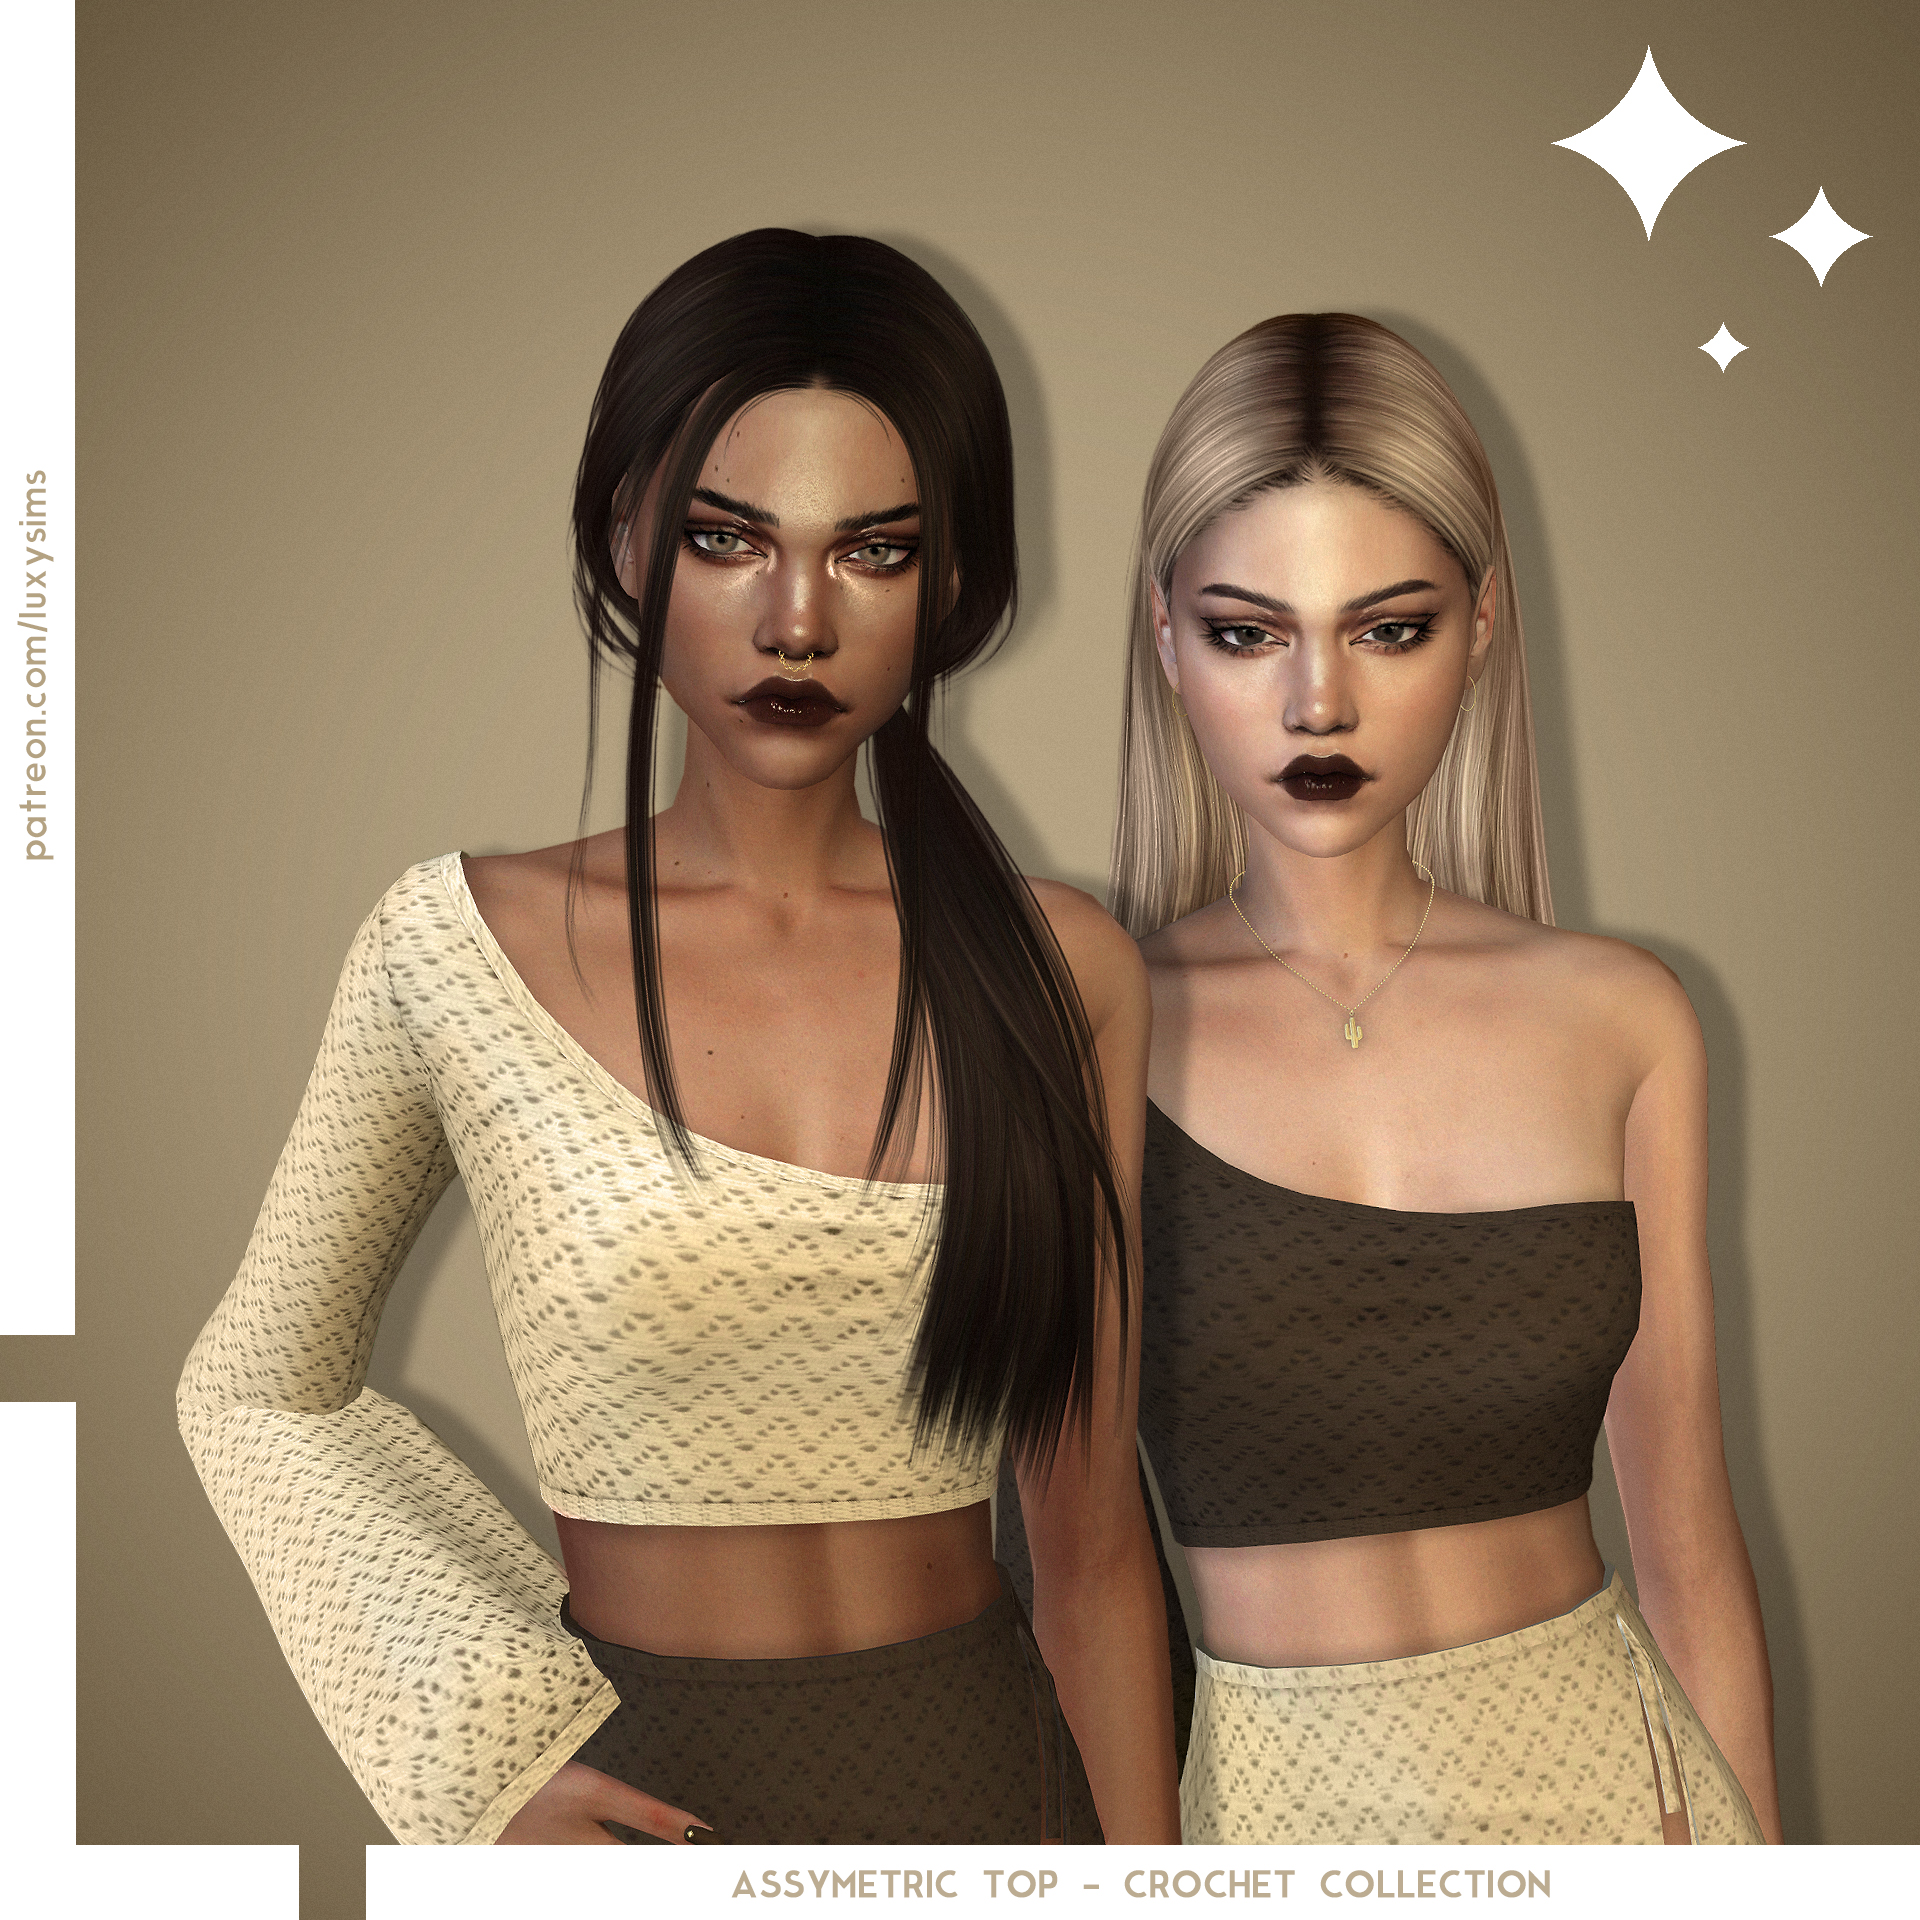 Assymetric Top - Crochet Collection project avatar